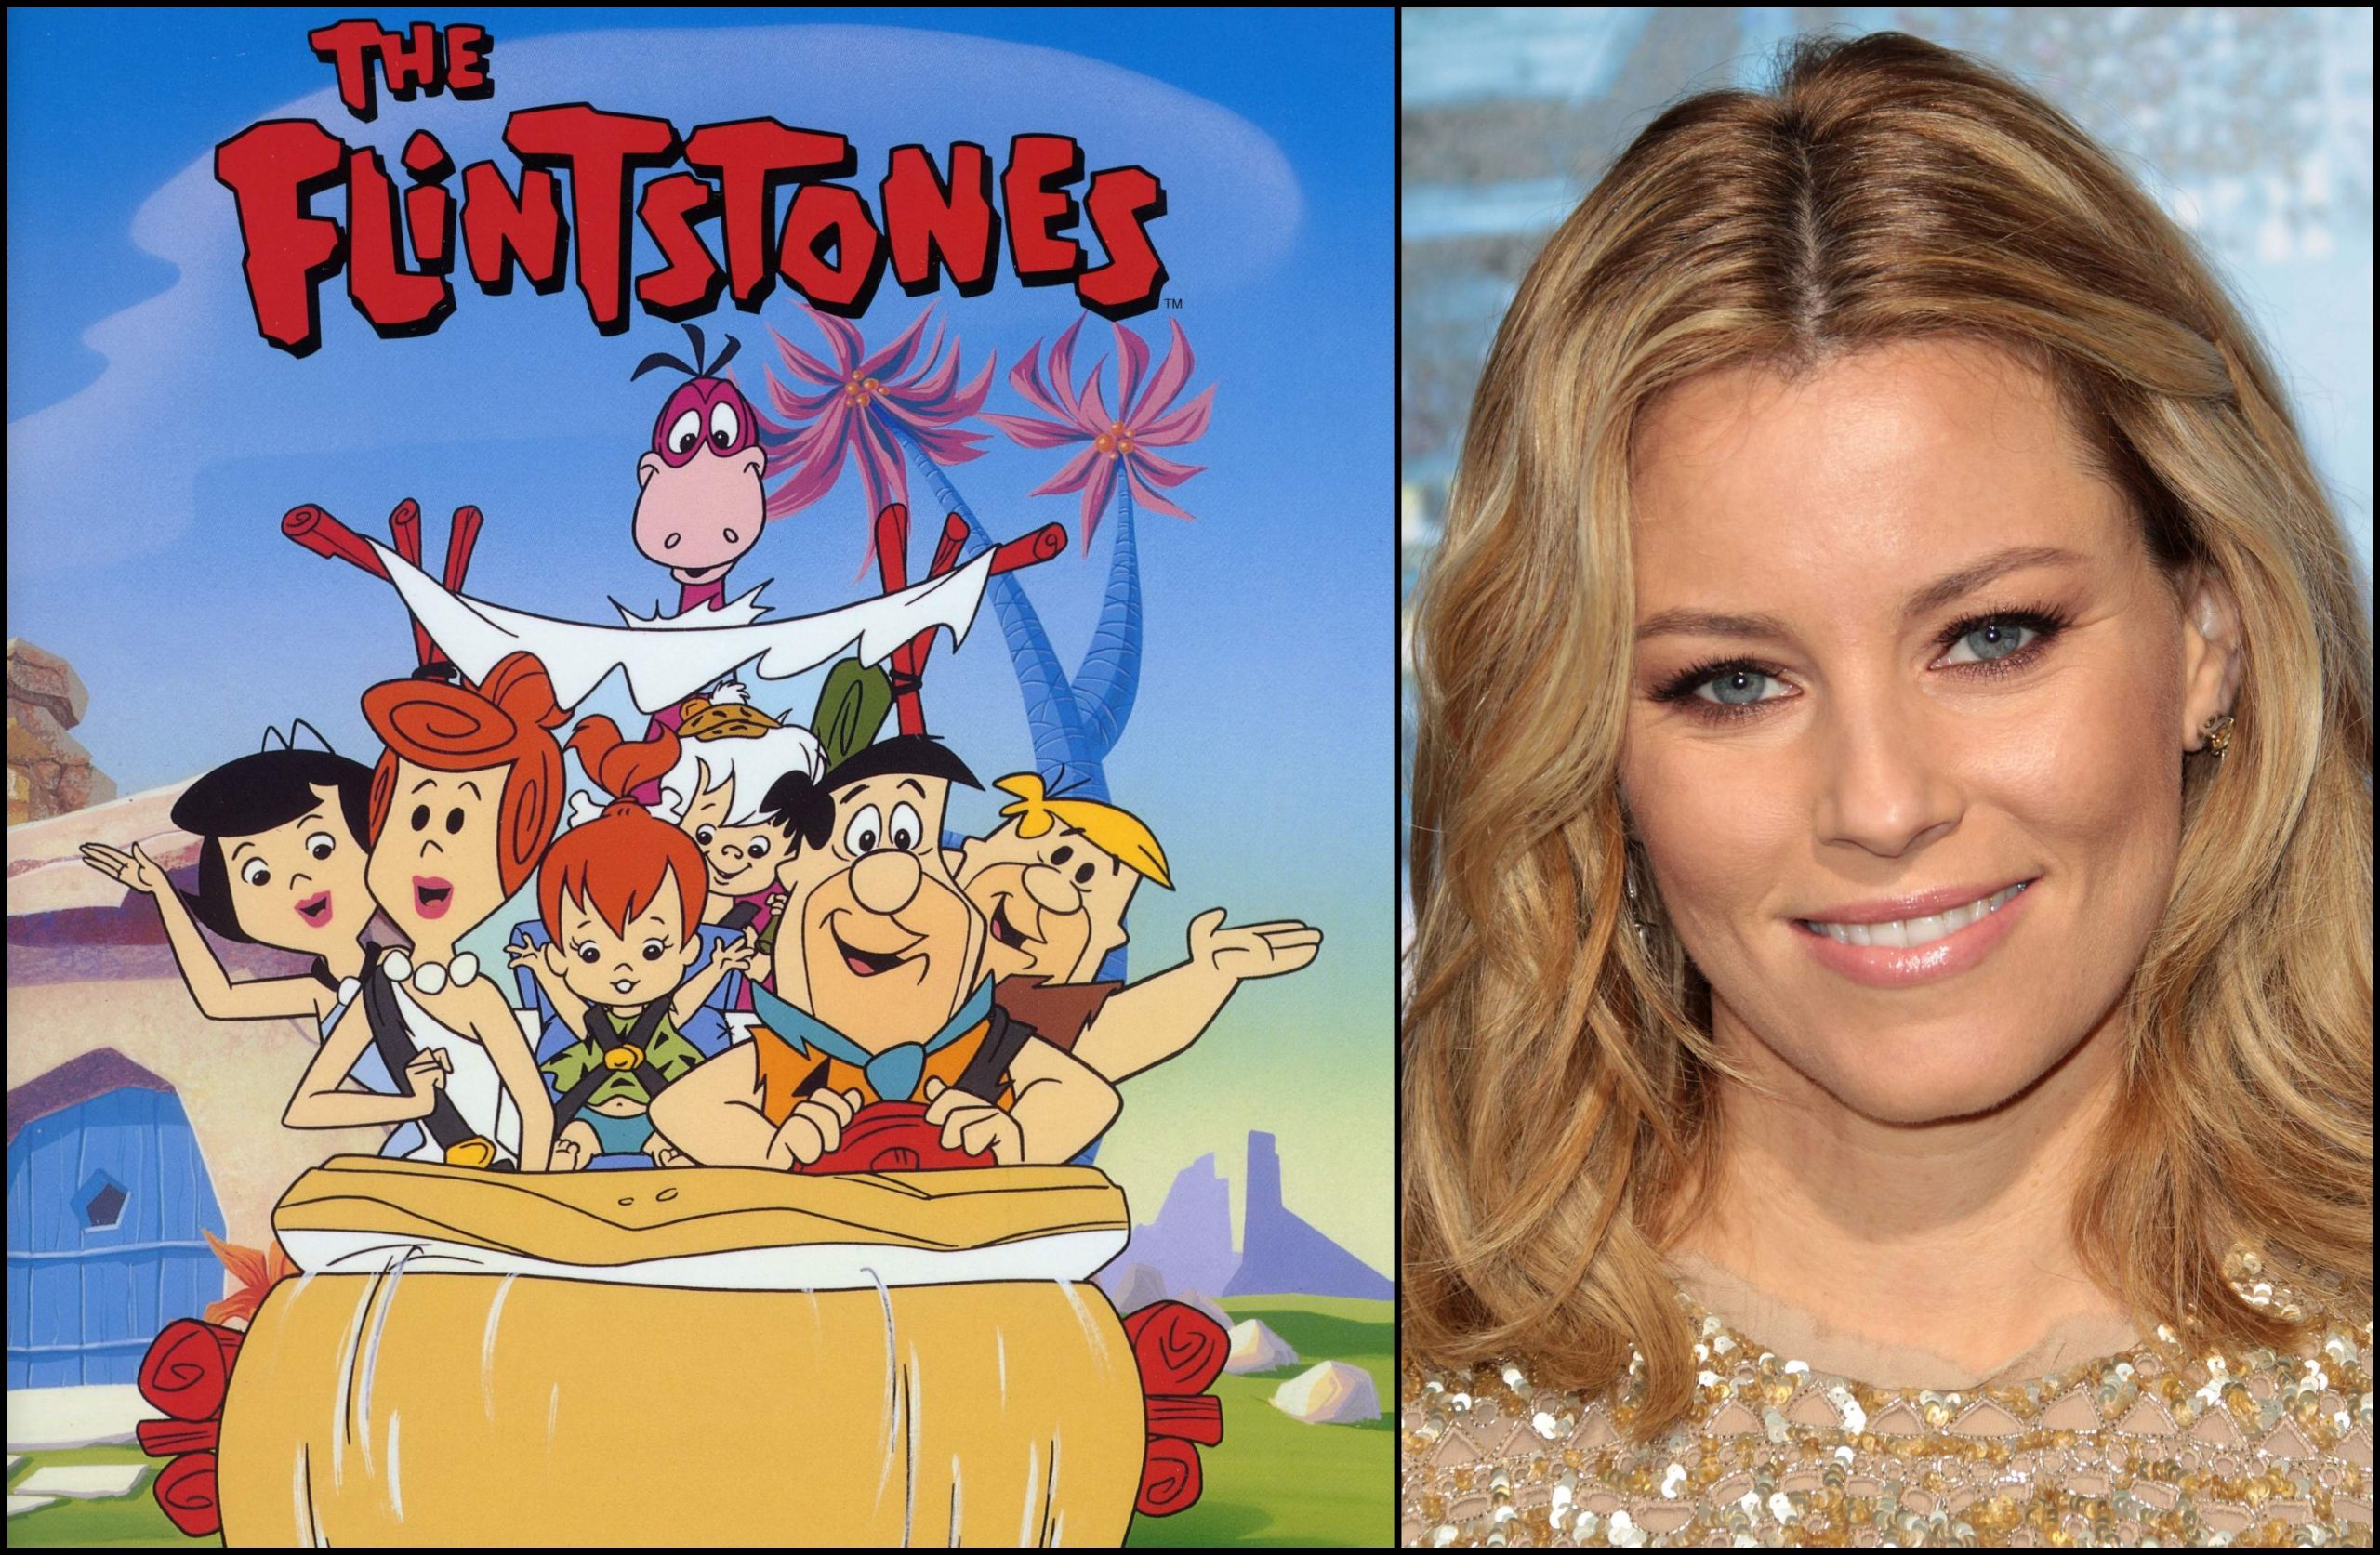 The Flintstones Adult Animated Comedy Sequel Series Bedrock From Elizabeth Banks In Works At 